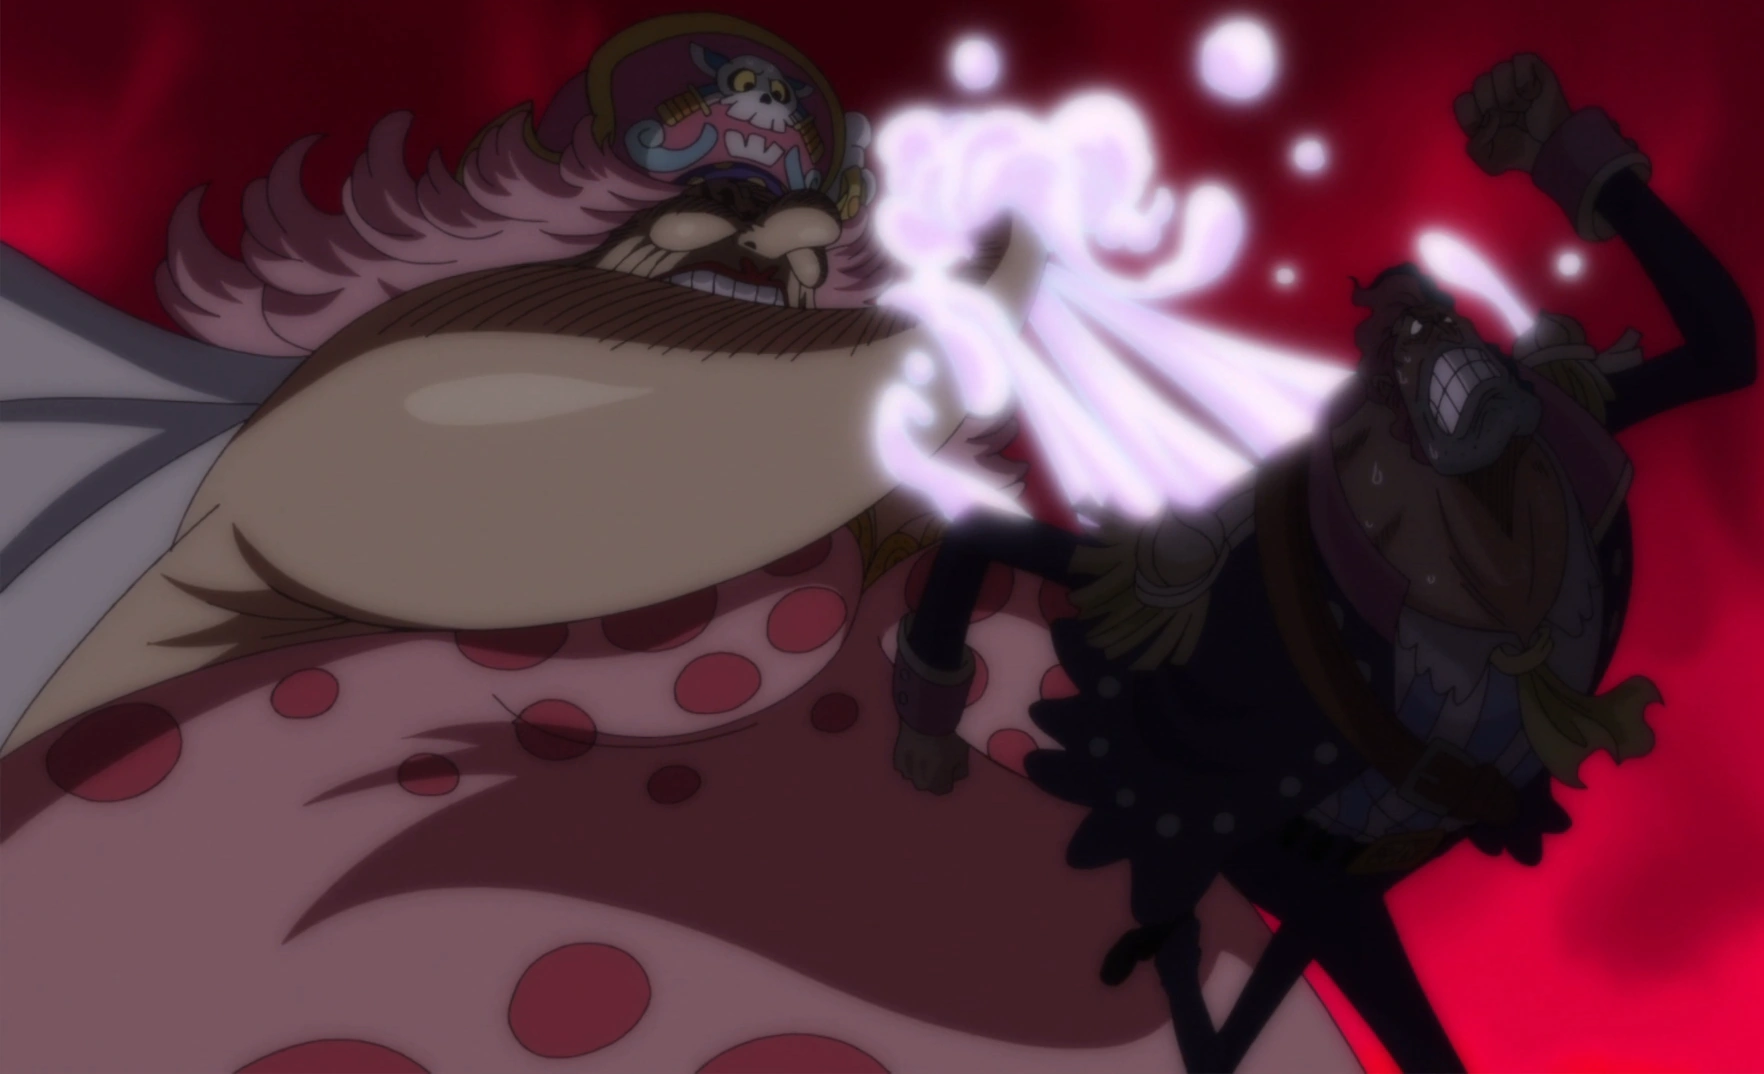 One Piece 809 - Big Mom Pissed At Luffy For Beating Cracker